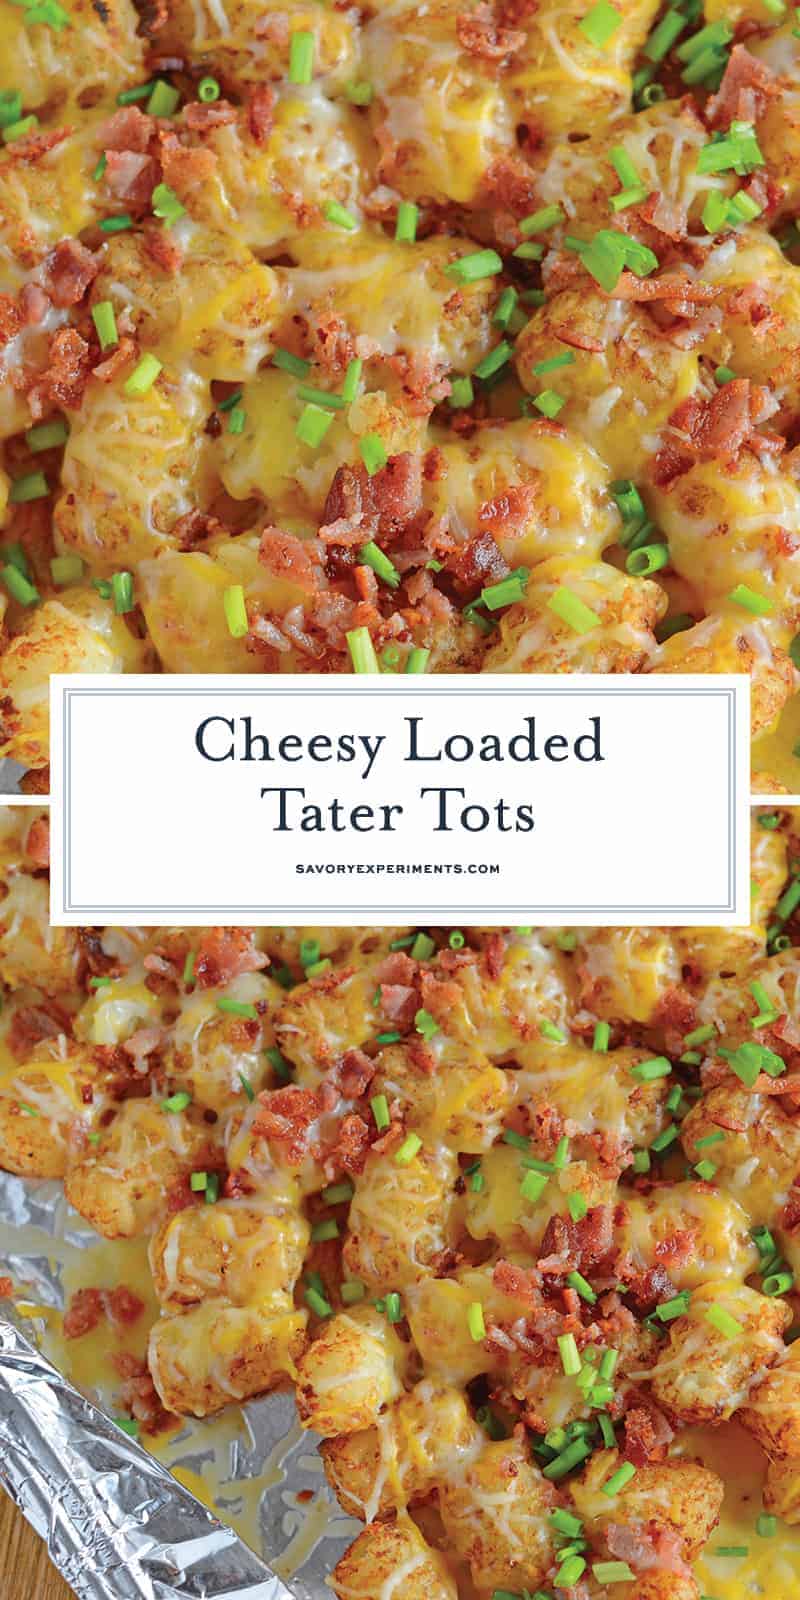 Cheesy Loaded Tater Tots are an easy side dish recipe or appetizer. Loaded tater tots are the best since they are loaded with cheese and bacon! #cheesytatertots #loadedtatertots #appetizerrecipes www.savoryexperiments.com